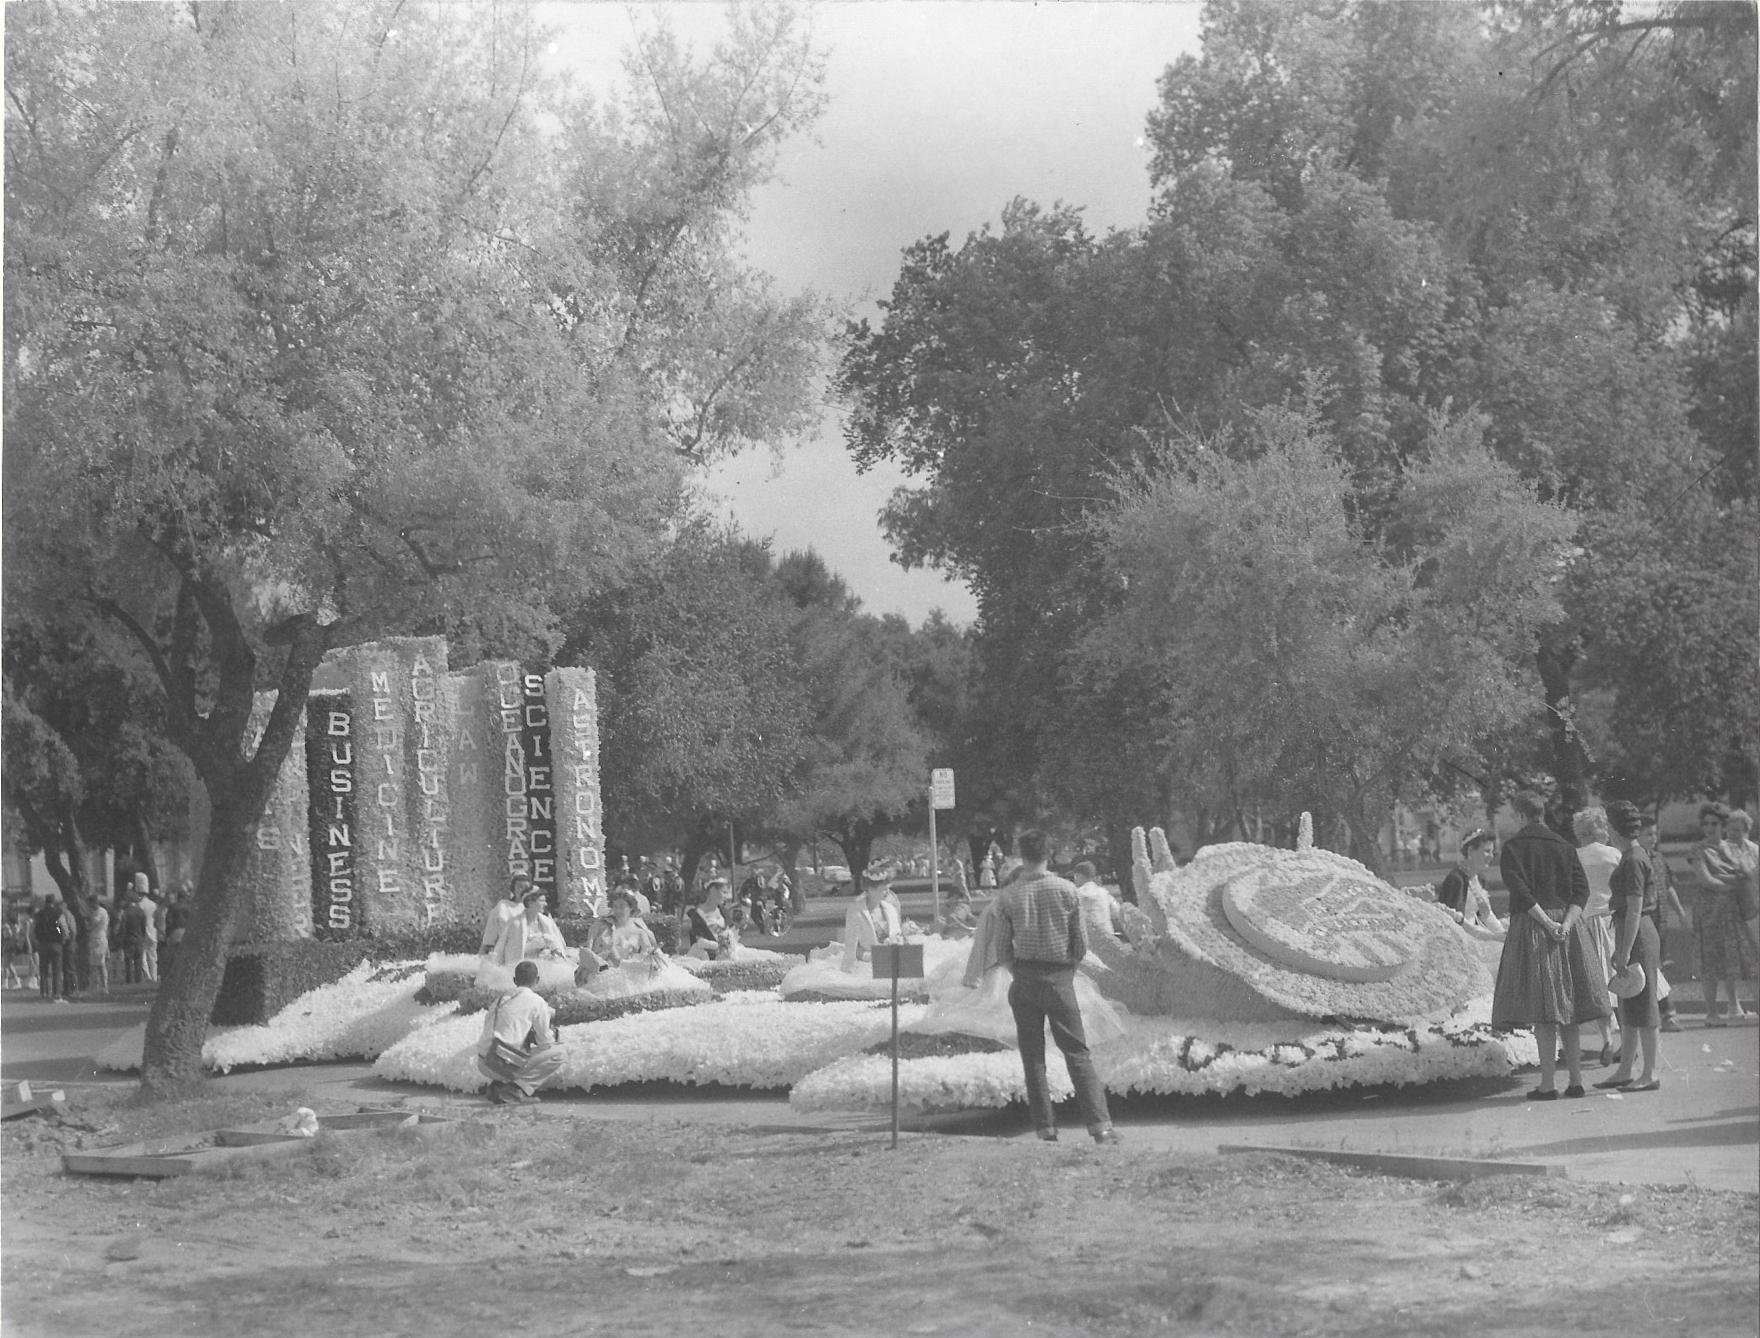  Food Technology float at the 1958 UC Davis Picnic Day